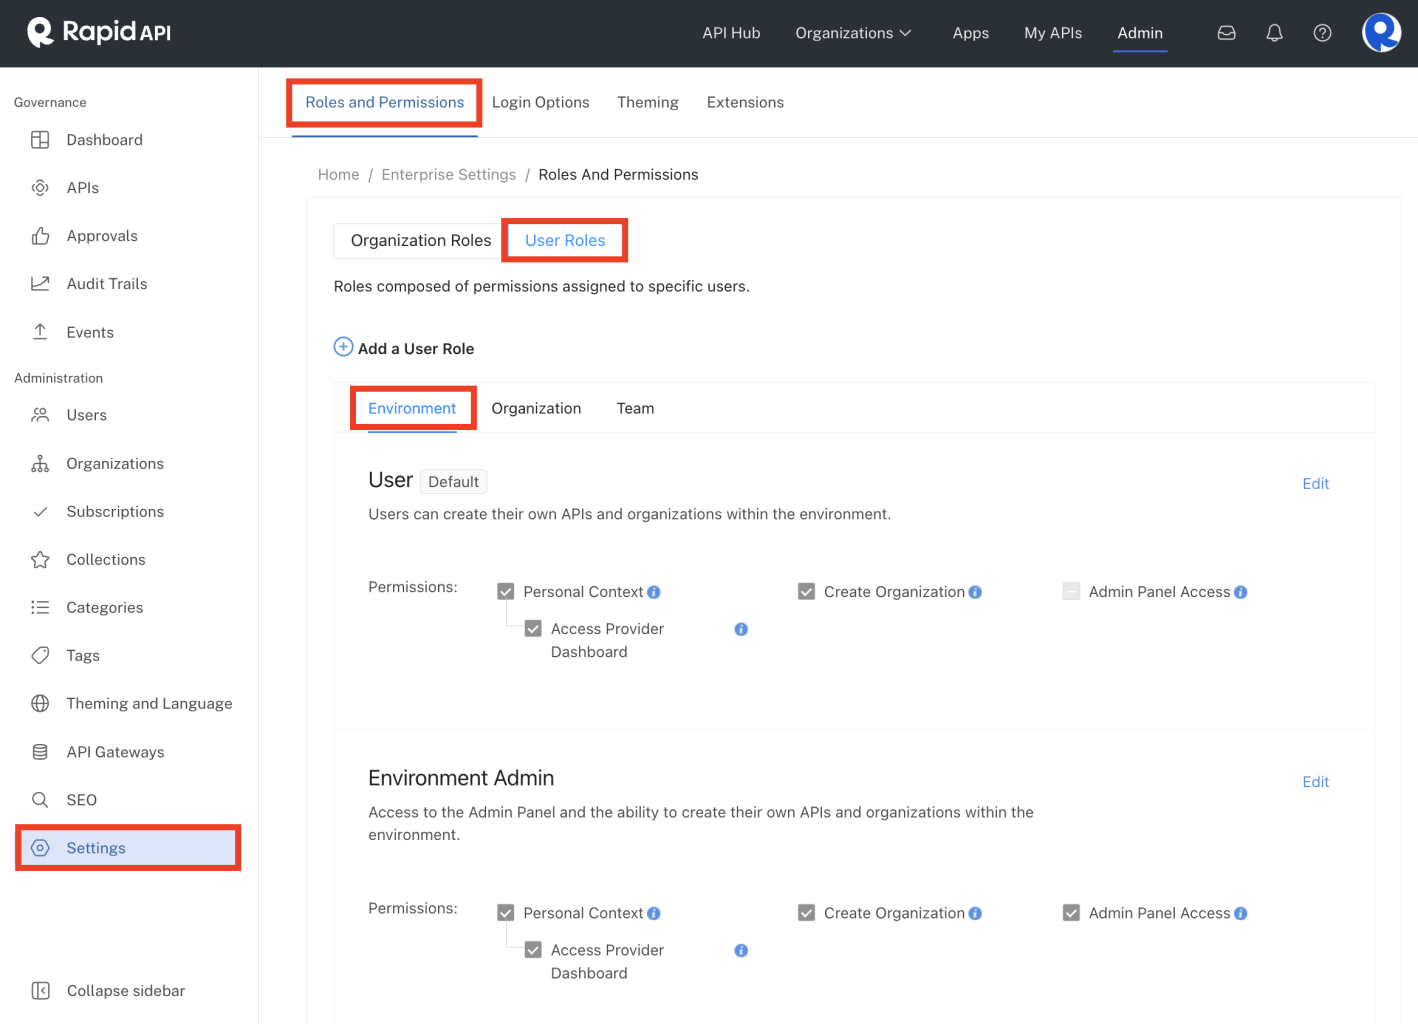 Environment user roles in the Admin Panel.